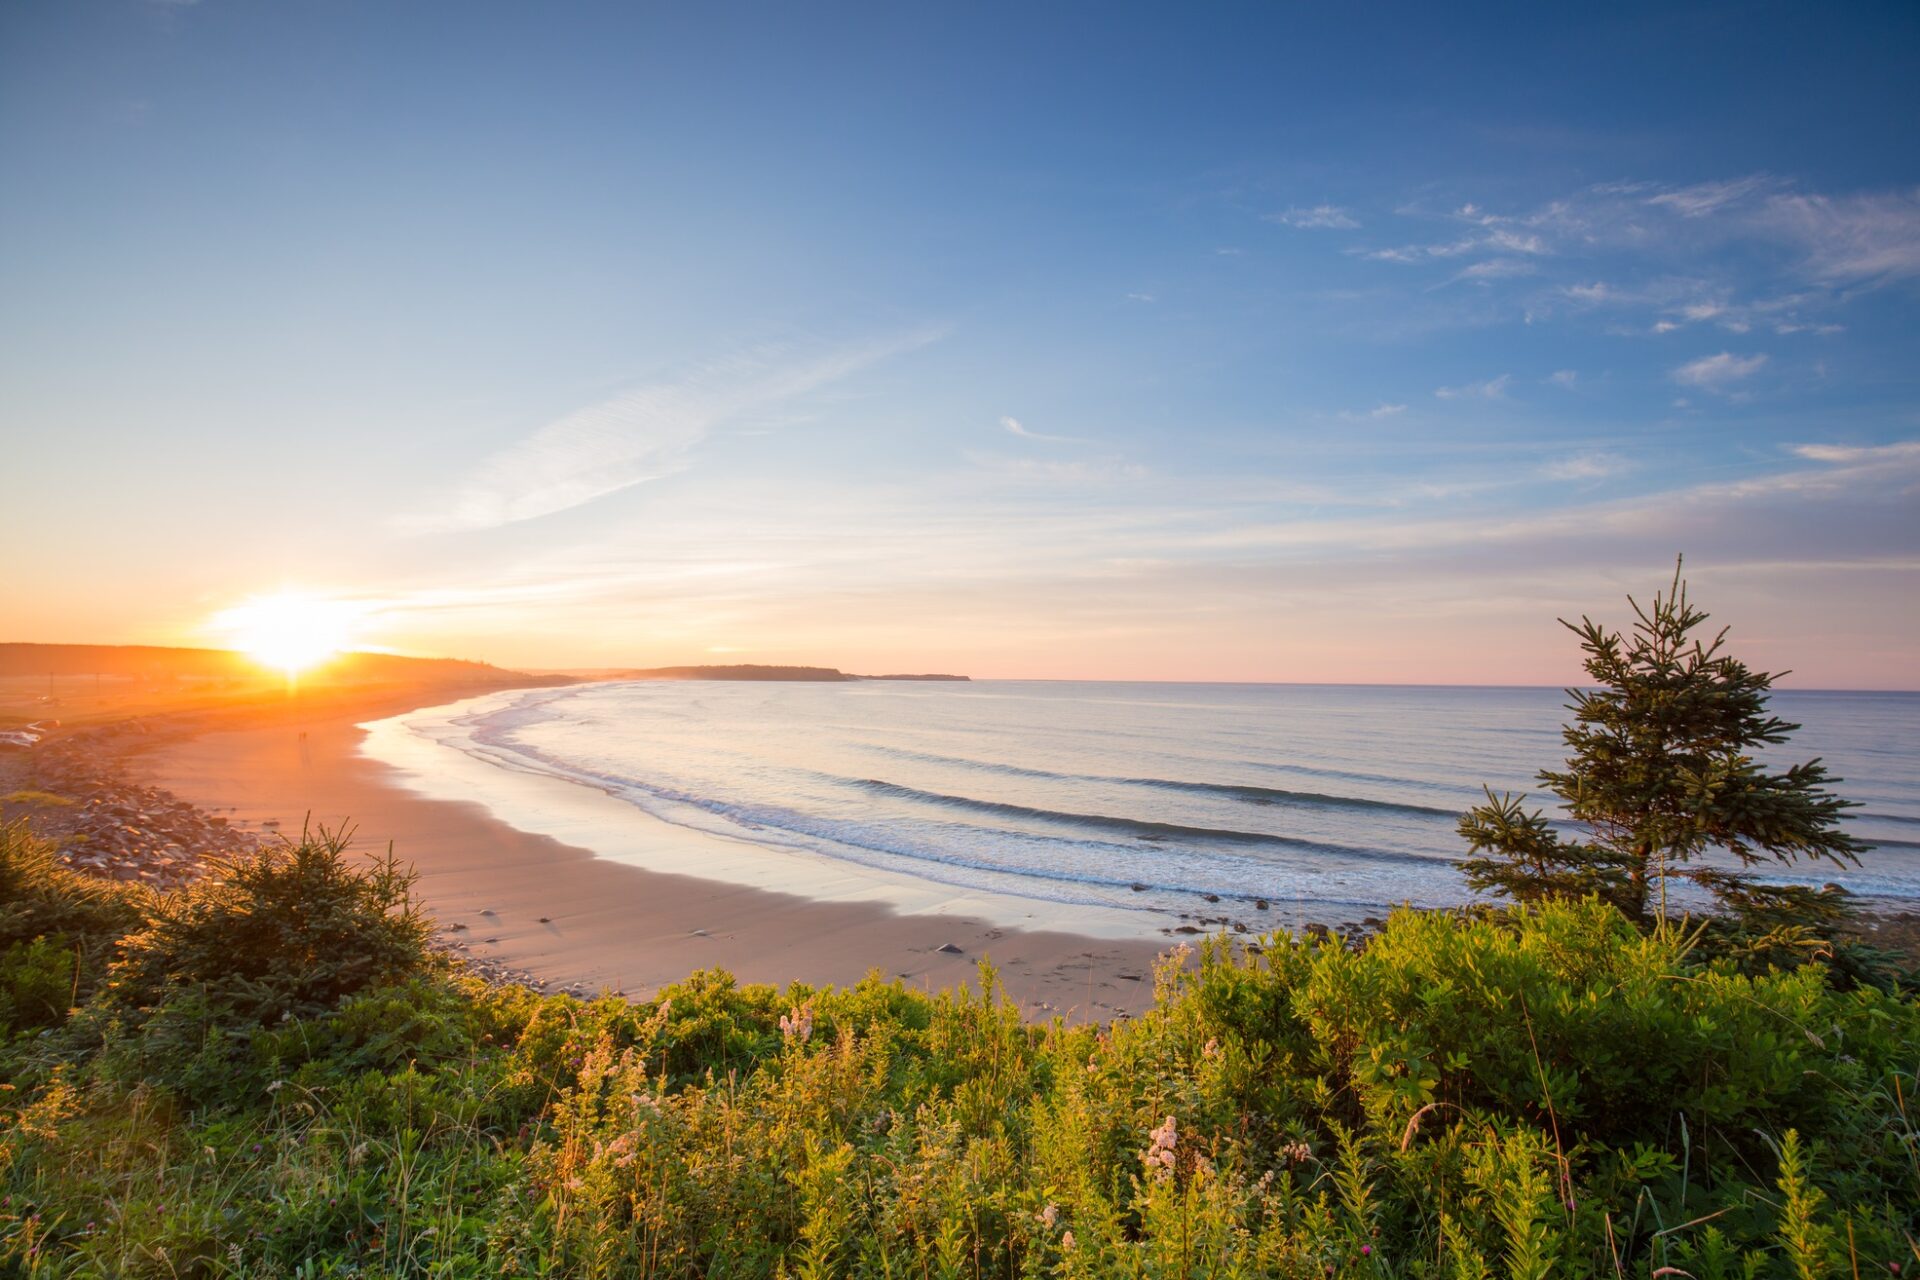 Beautiful picture of Lawrencetown Beach, one of the most popular beaches on Nova Scotia's Eastern Shore road trip
